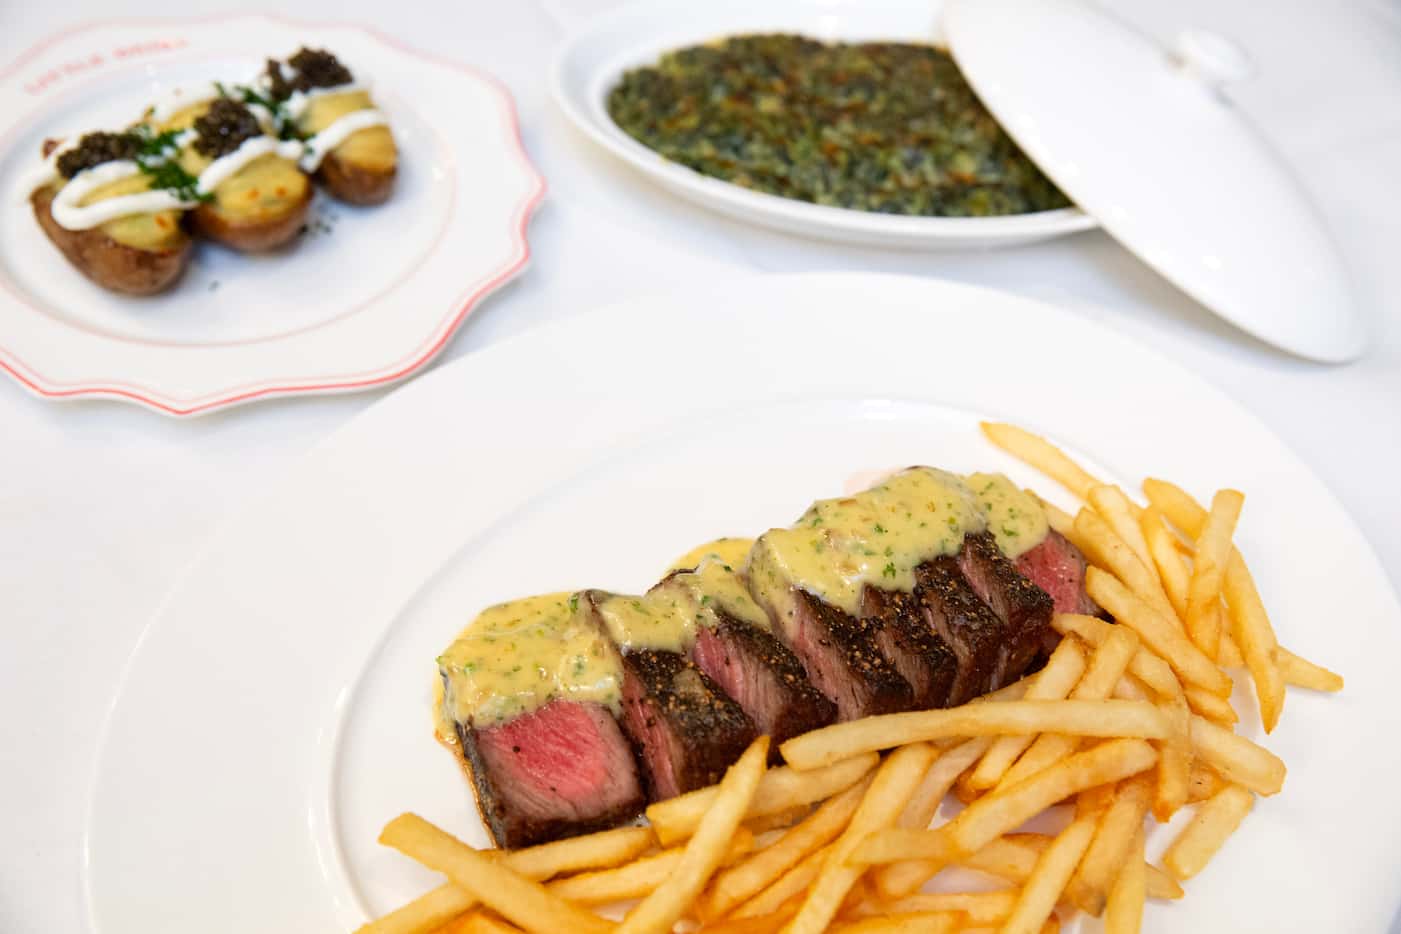 Little Daisy's steak frites, bottom right, can be ordered with sides like creamed spinach or...